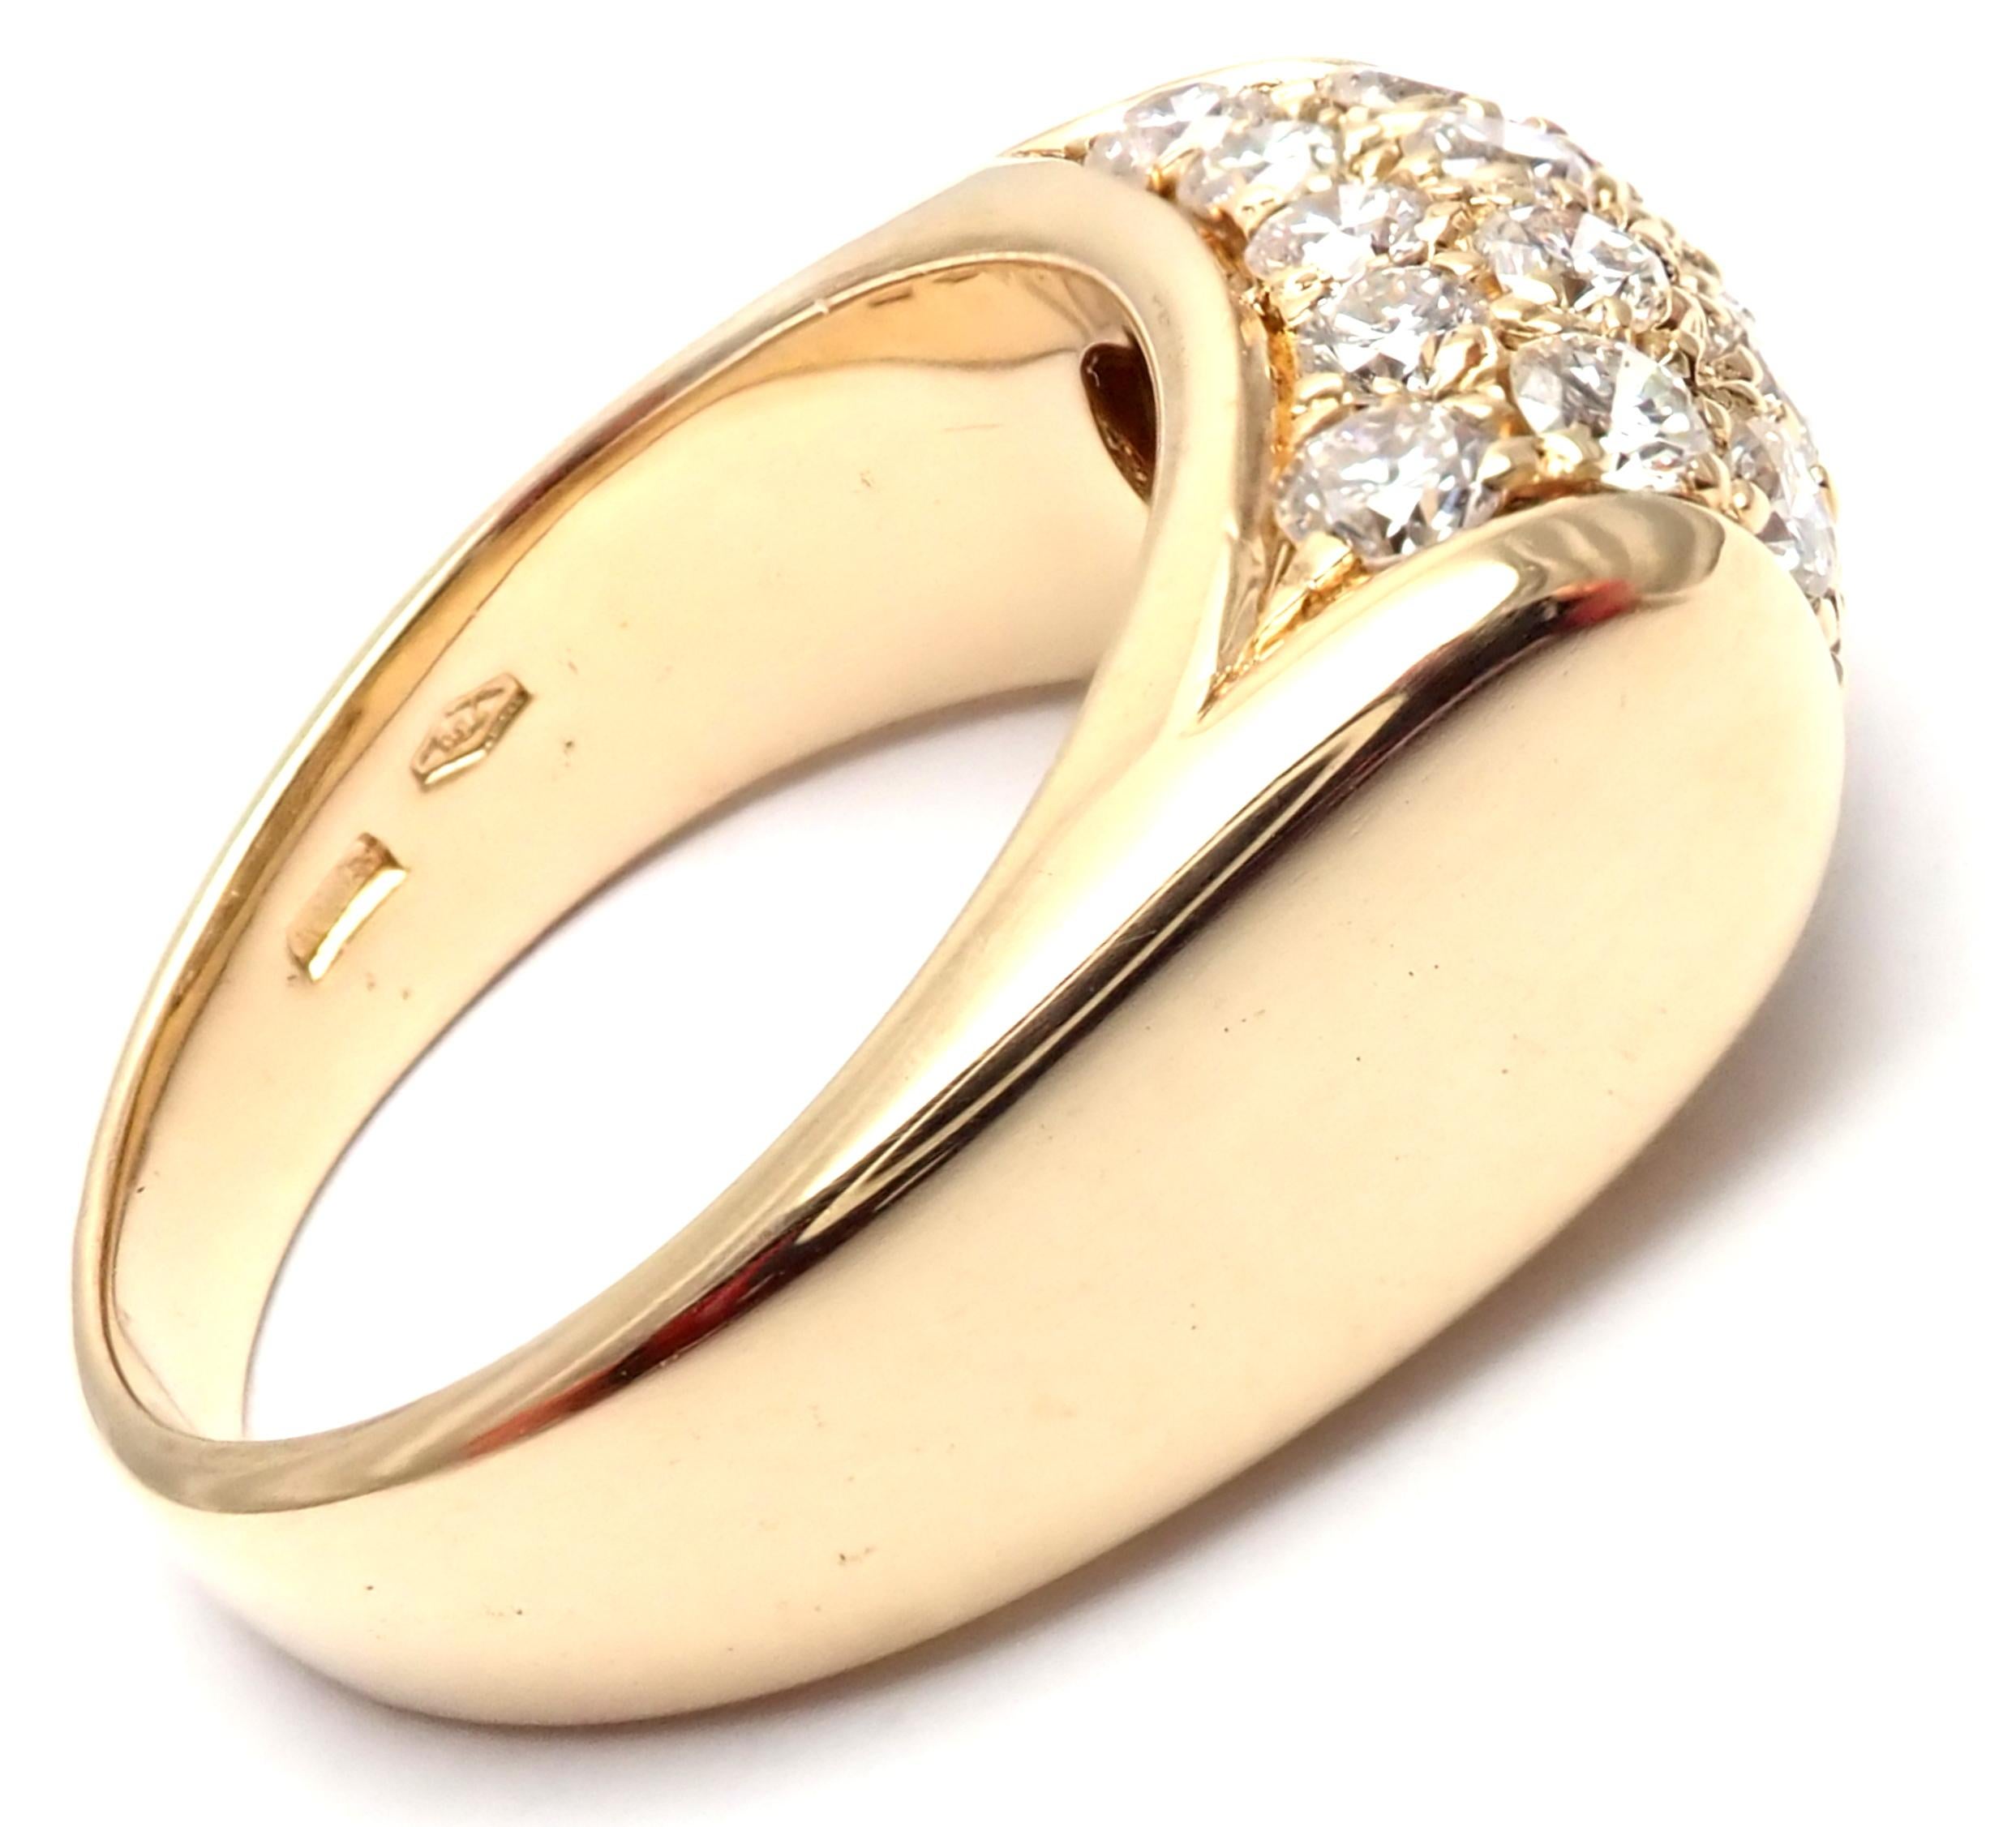 18k Yellow Gold Diamond Tronchetto Band Ring by Bulgari.
With 22 round brilliant cut diamonds VS1 clarity, G color total weight approx. .75ct
Details:
Ring Size: 5.5
Weight: 8.6 grams
Width: 8.5mm
Stamped Hallmarks: Bvlgari 750
*Free Shipping within